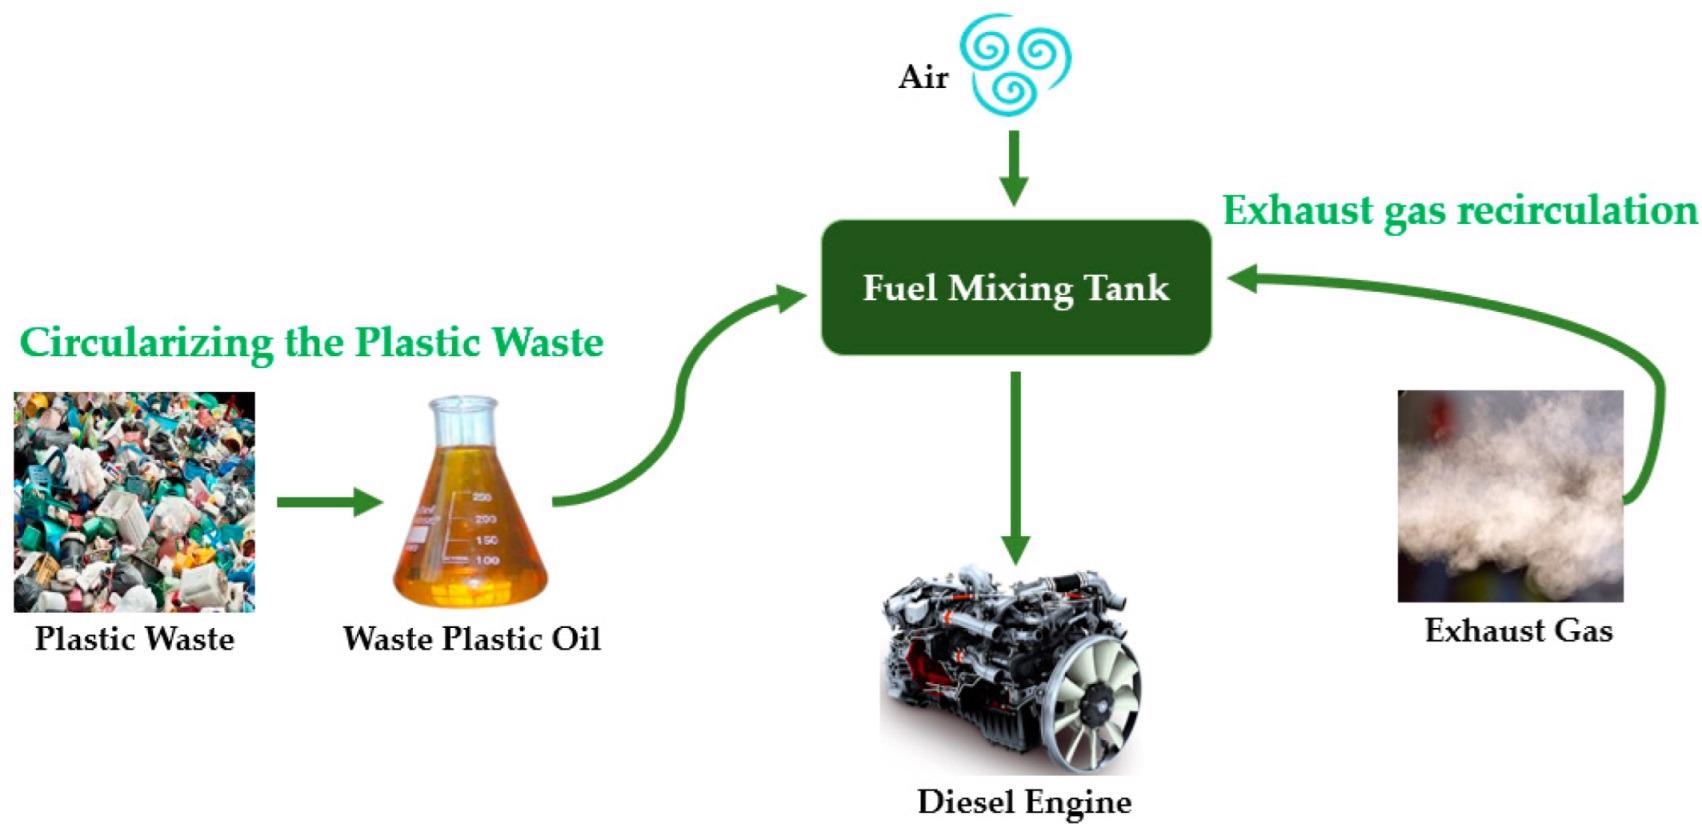 Use of waste plastic oil and exhaust gas recirculation in line with the circular economy.